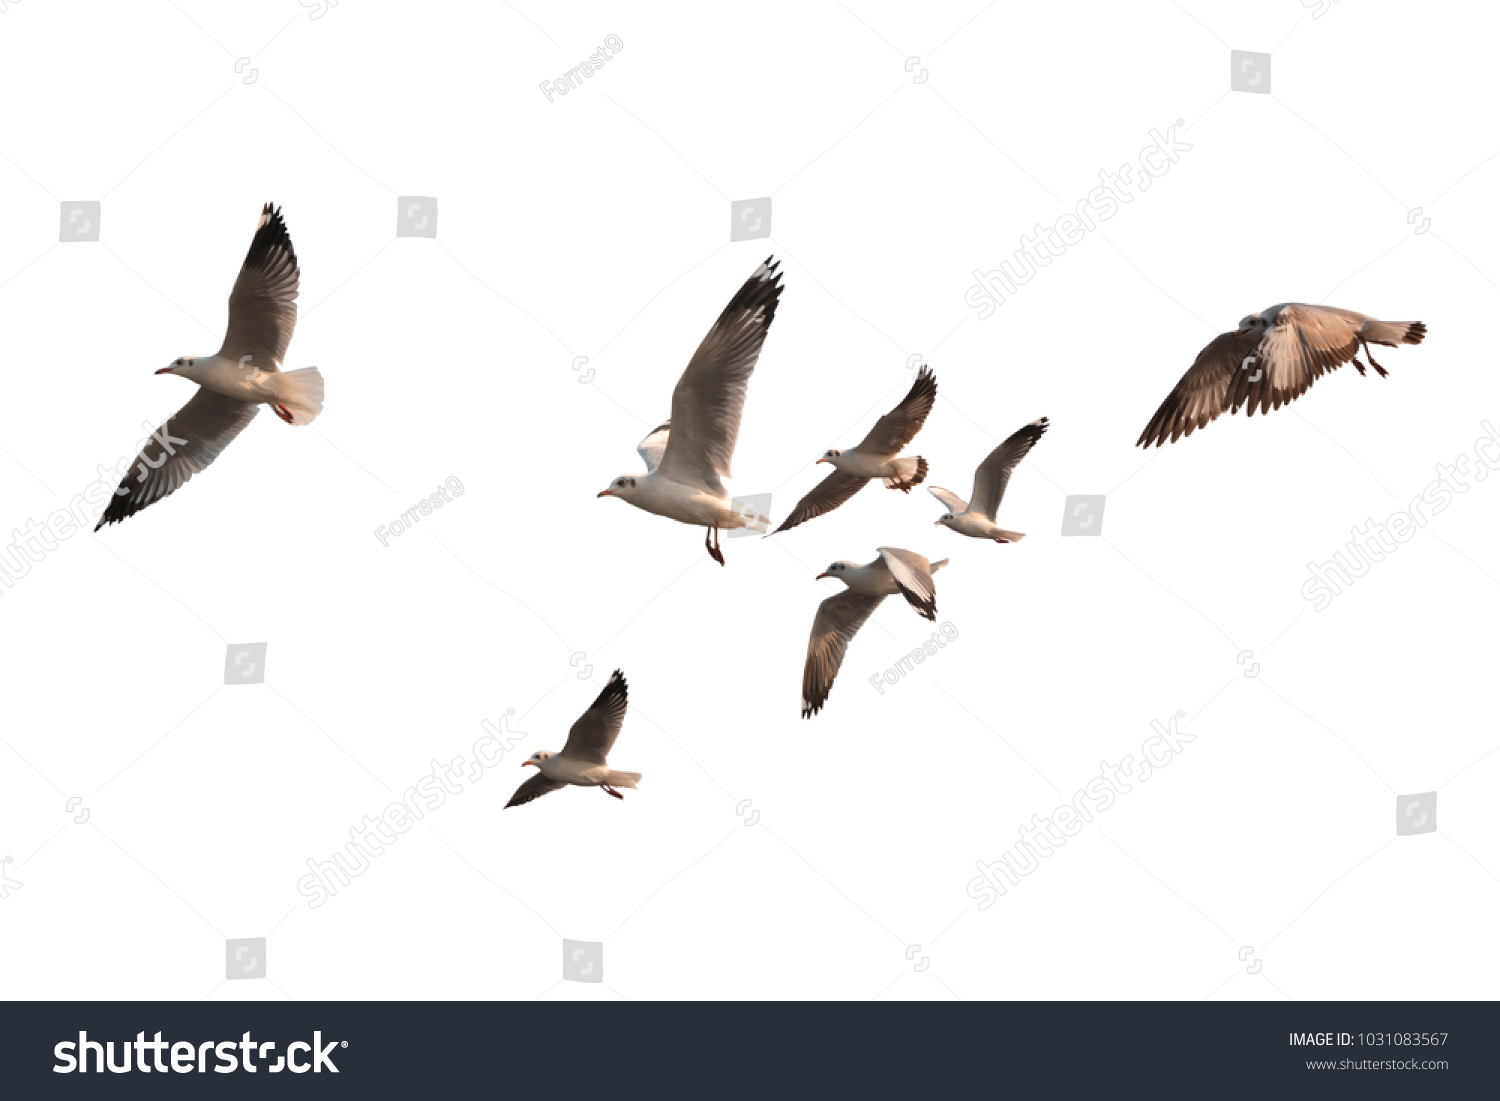 Flock of birds flying isolated on white background. This has clipping path. #1031083567